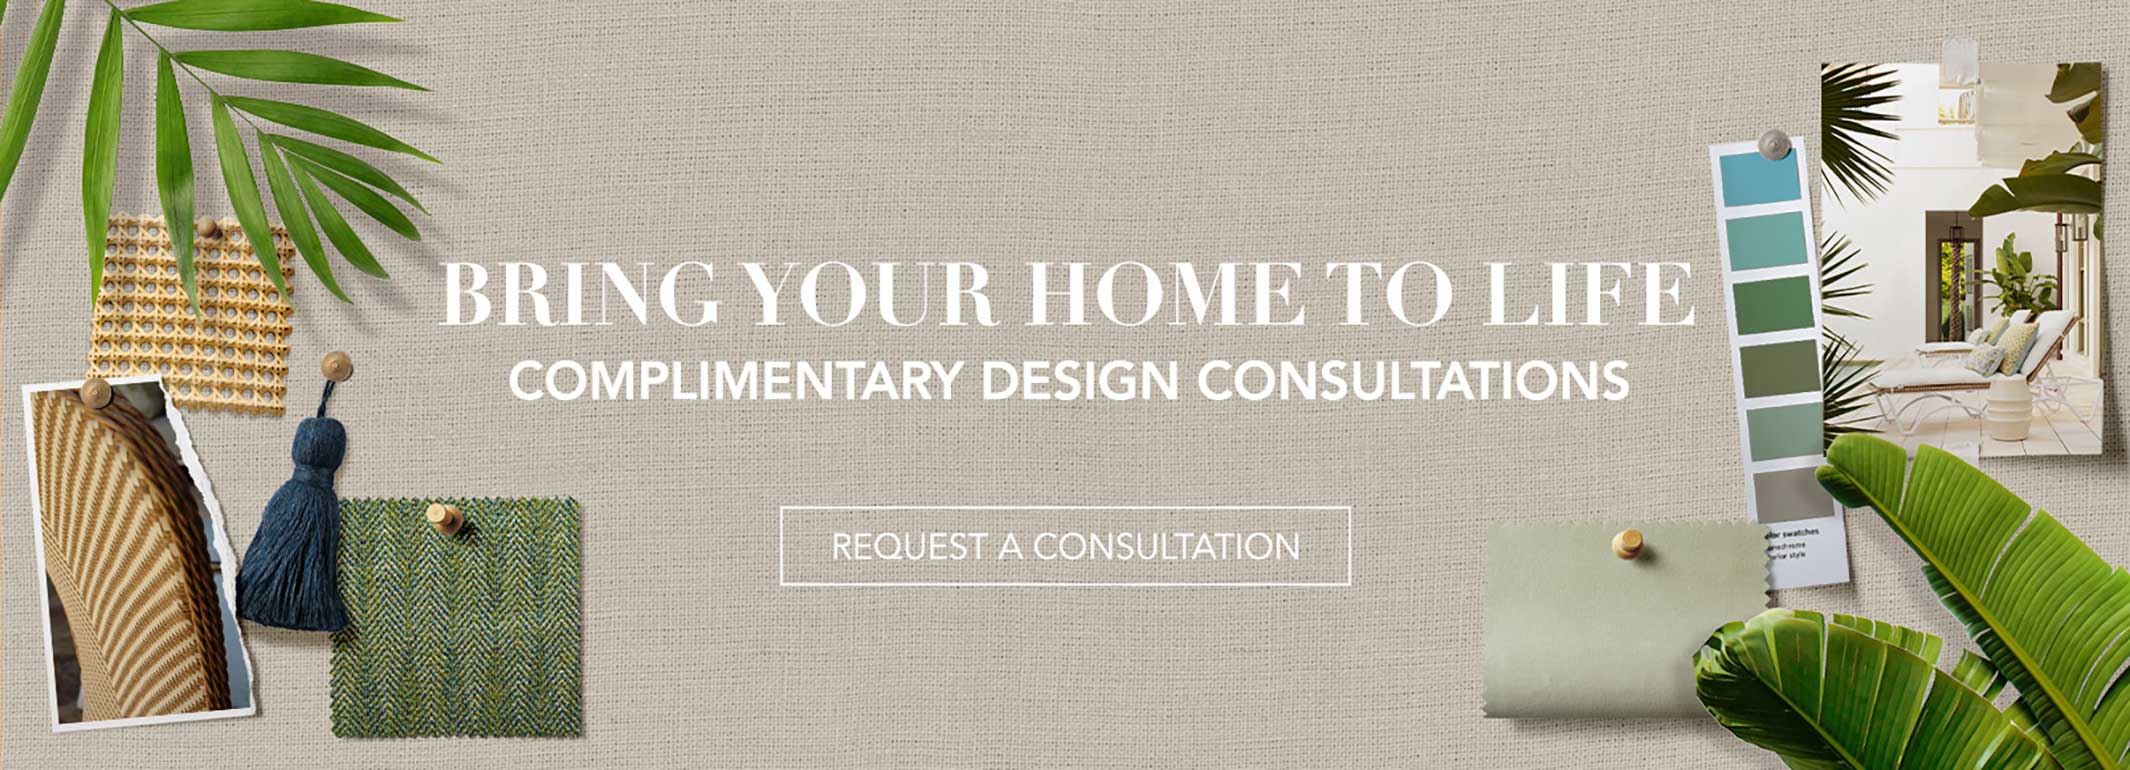 Bring your home to life | request a consultation